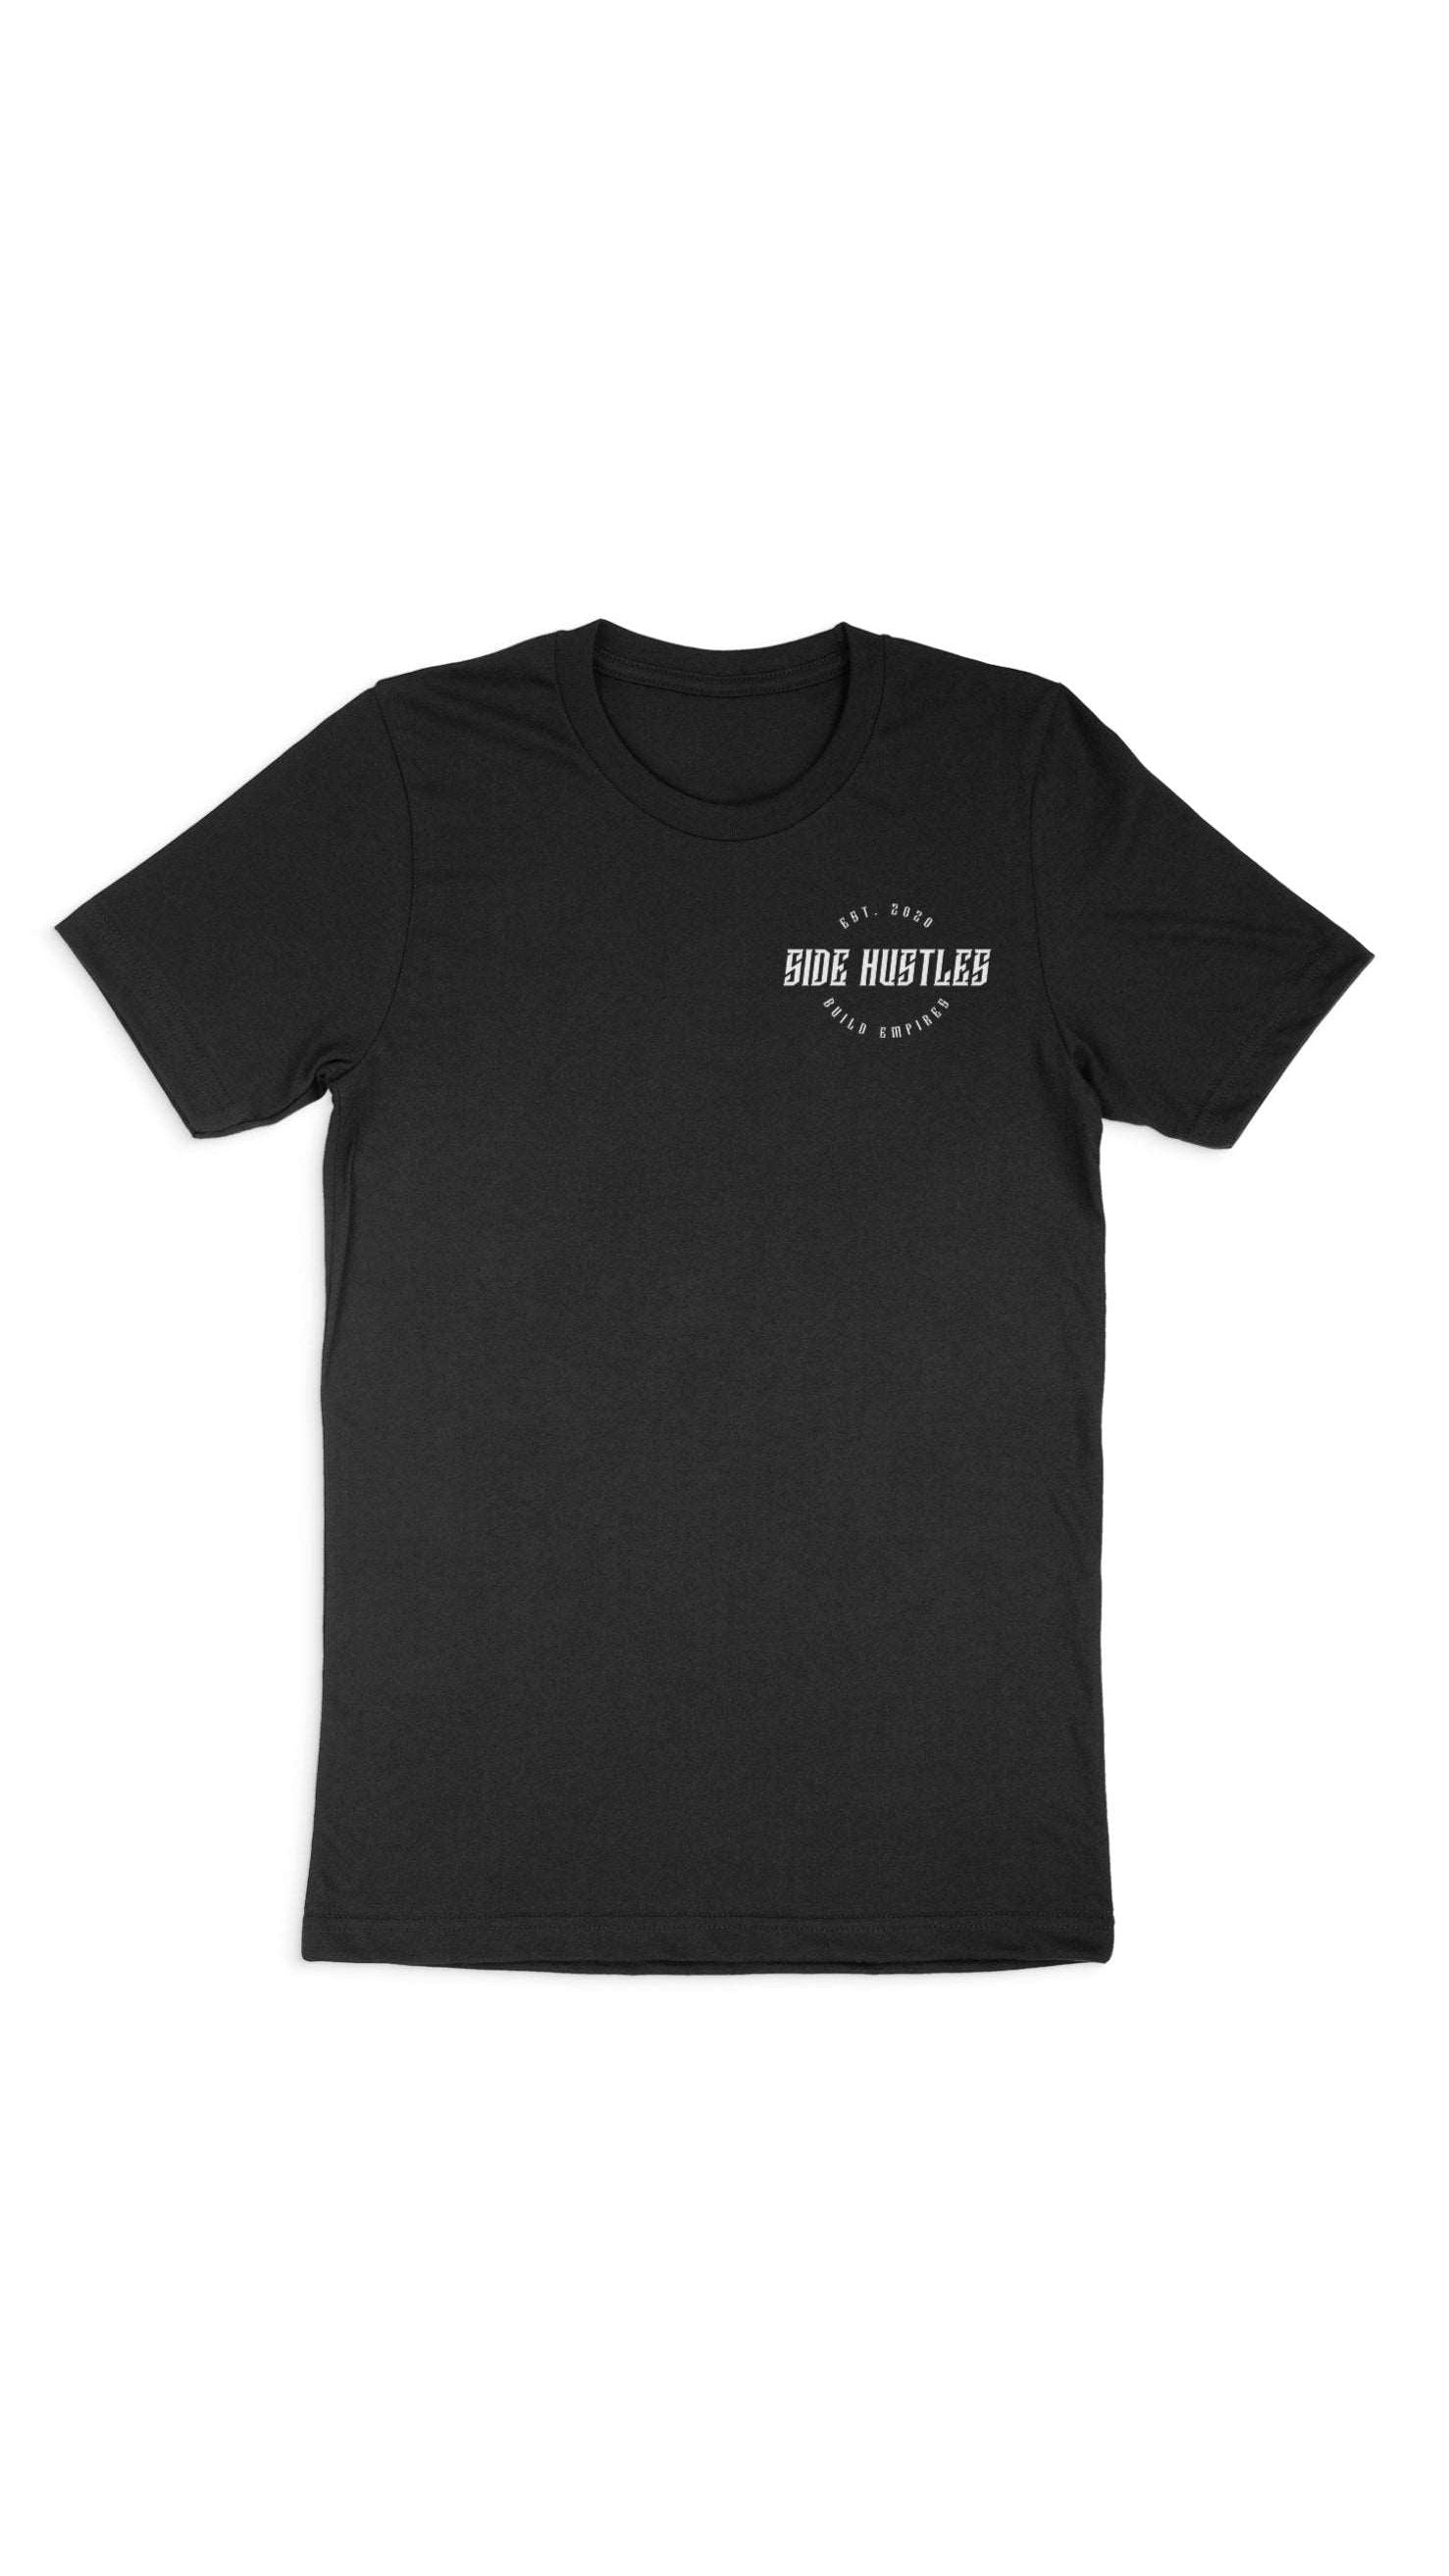 Front image of black soft premium screen printed shirt with side epistle design small front pocket area